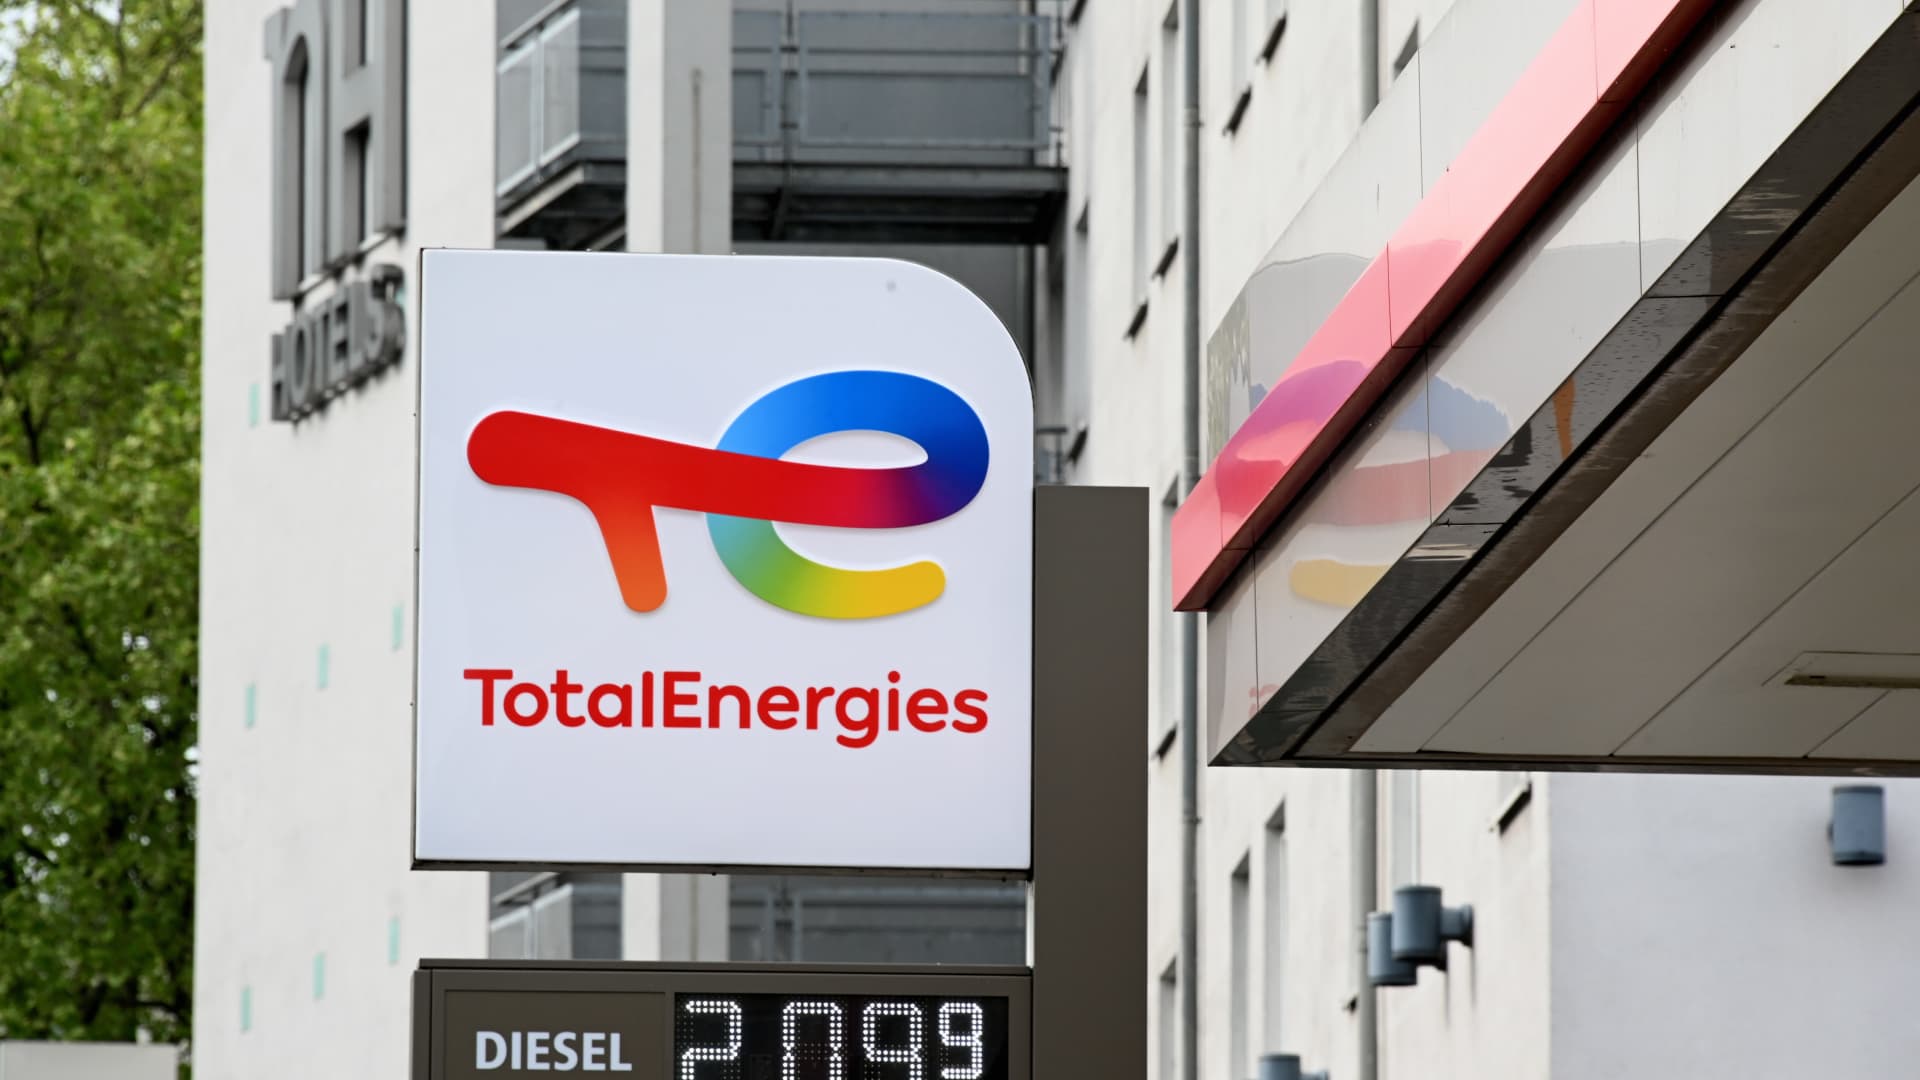 TotalEnergies has announced a discount on fuel prices at highway stations in France for the summer holiday season.